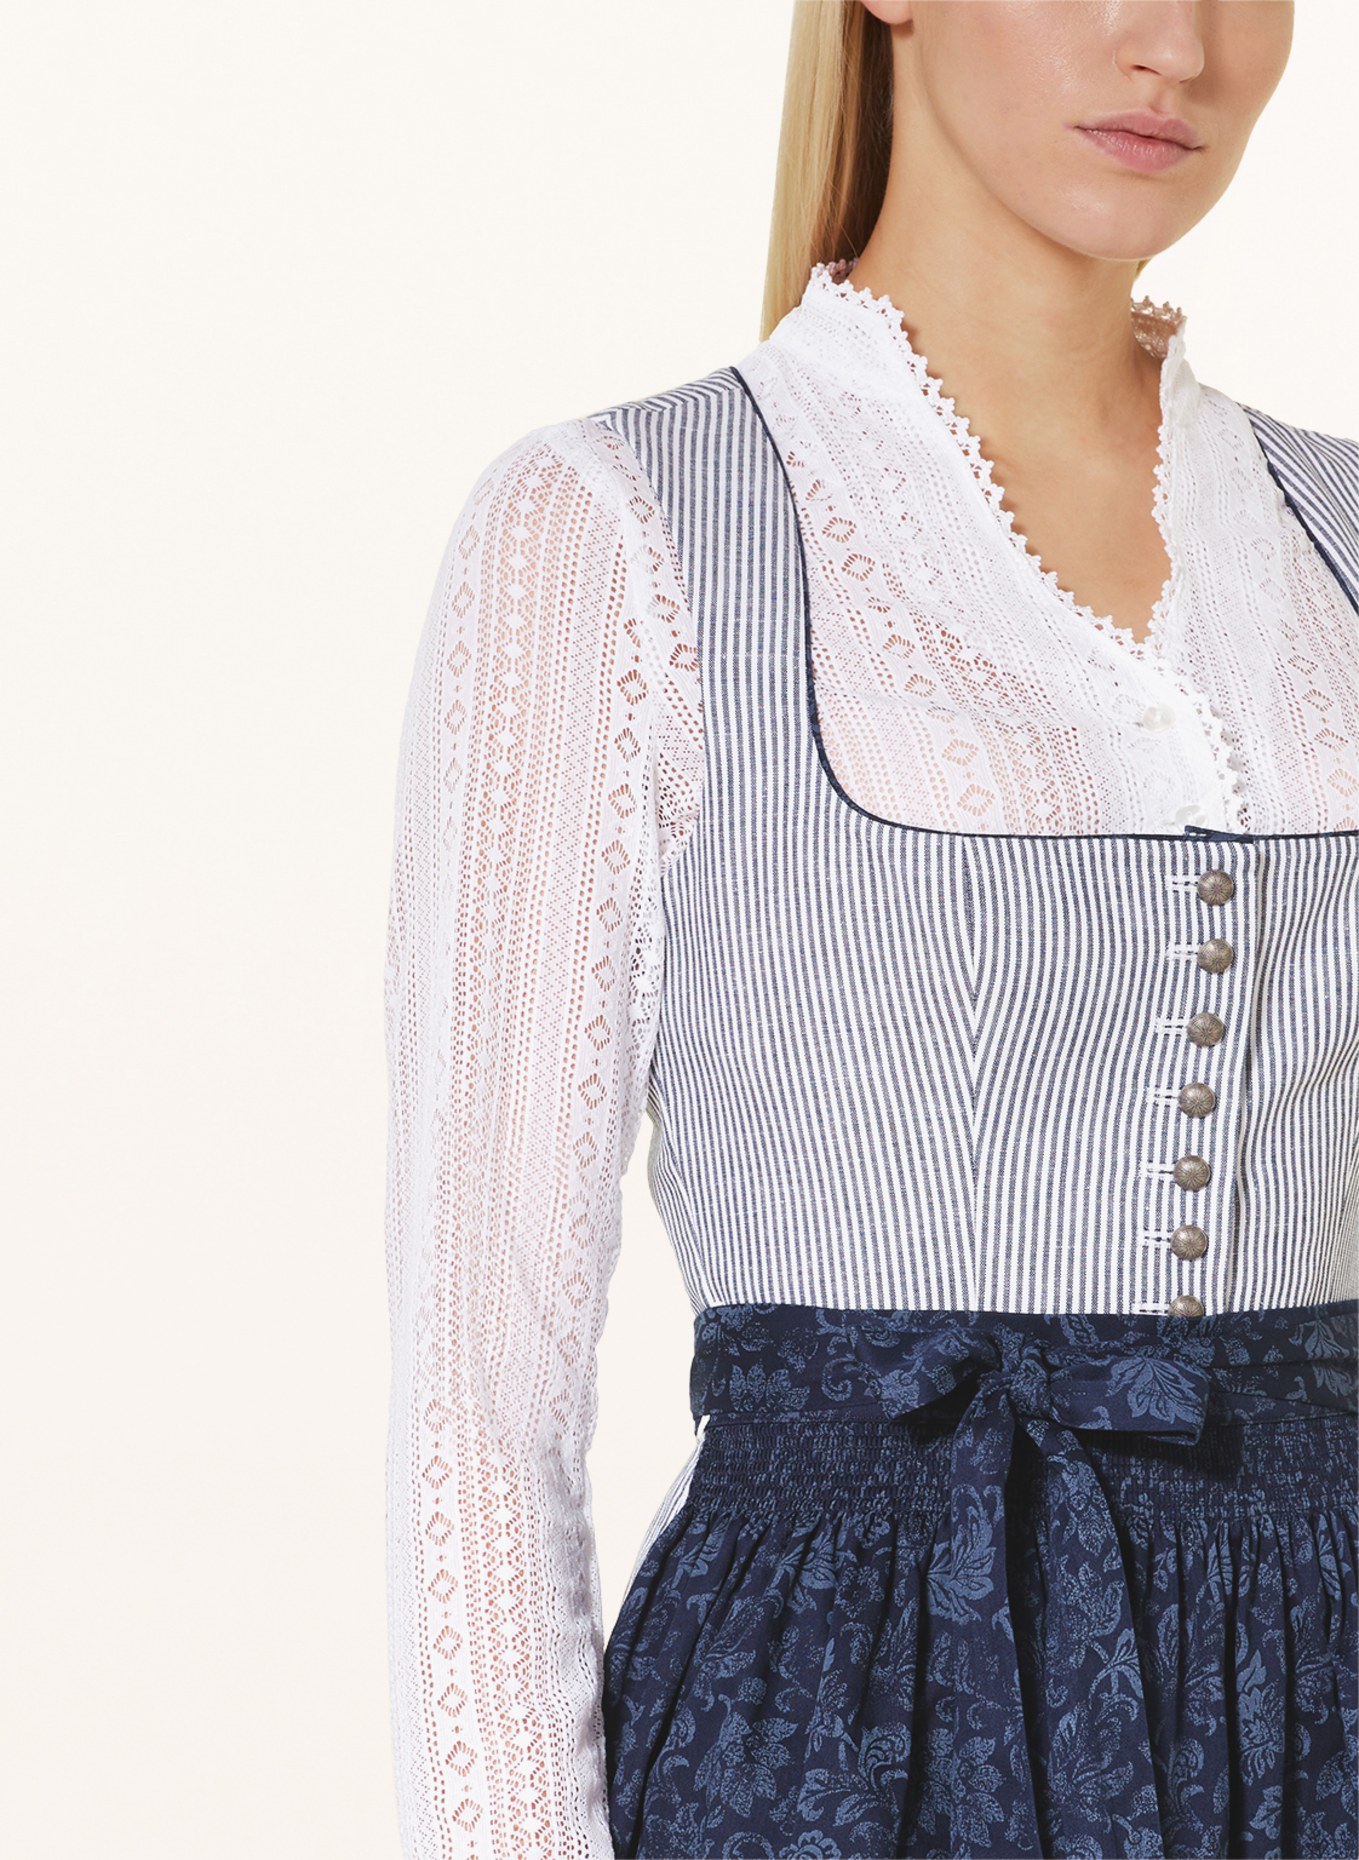 BERWIN & WOLFF Dirndl with lace, Color: WHITE (Image 3)